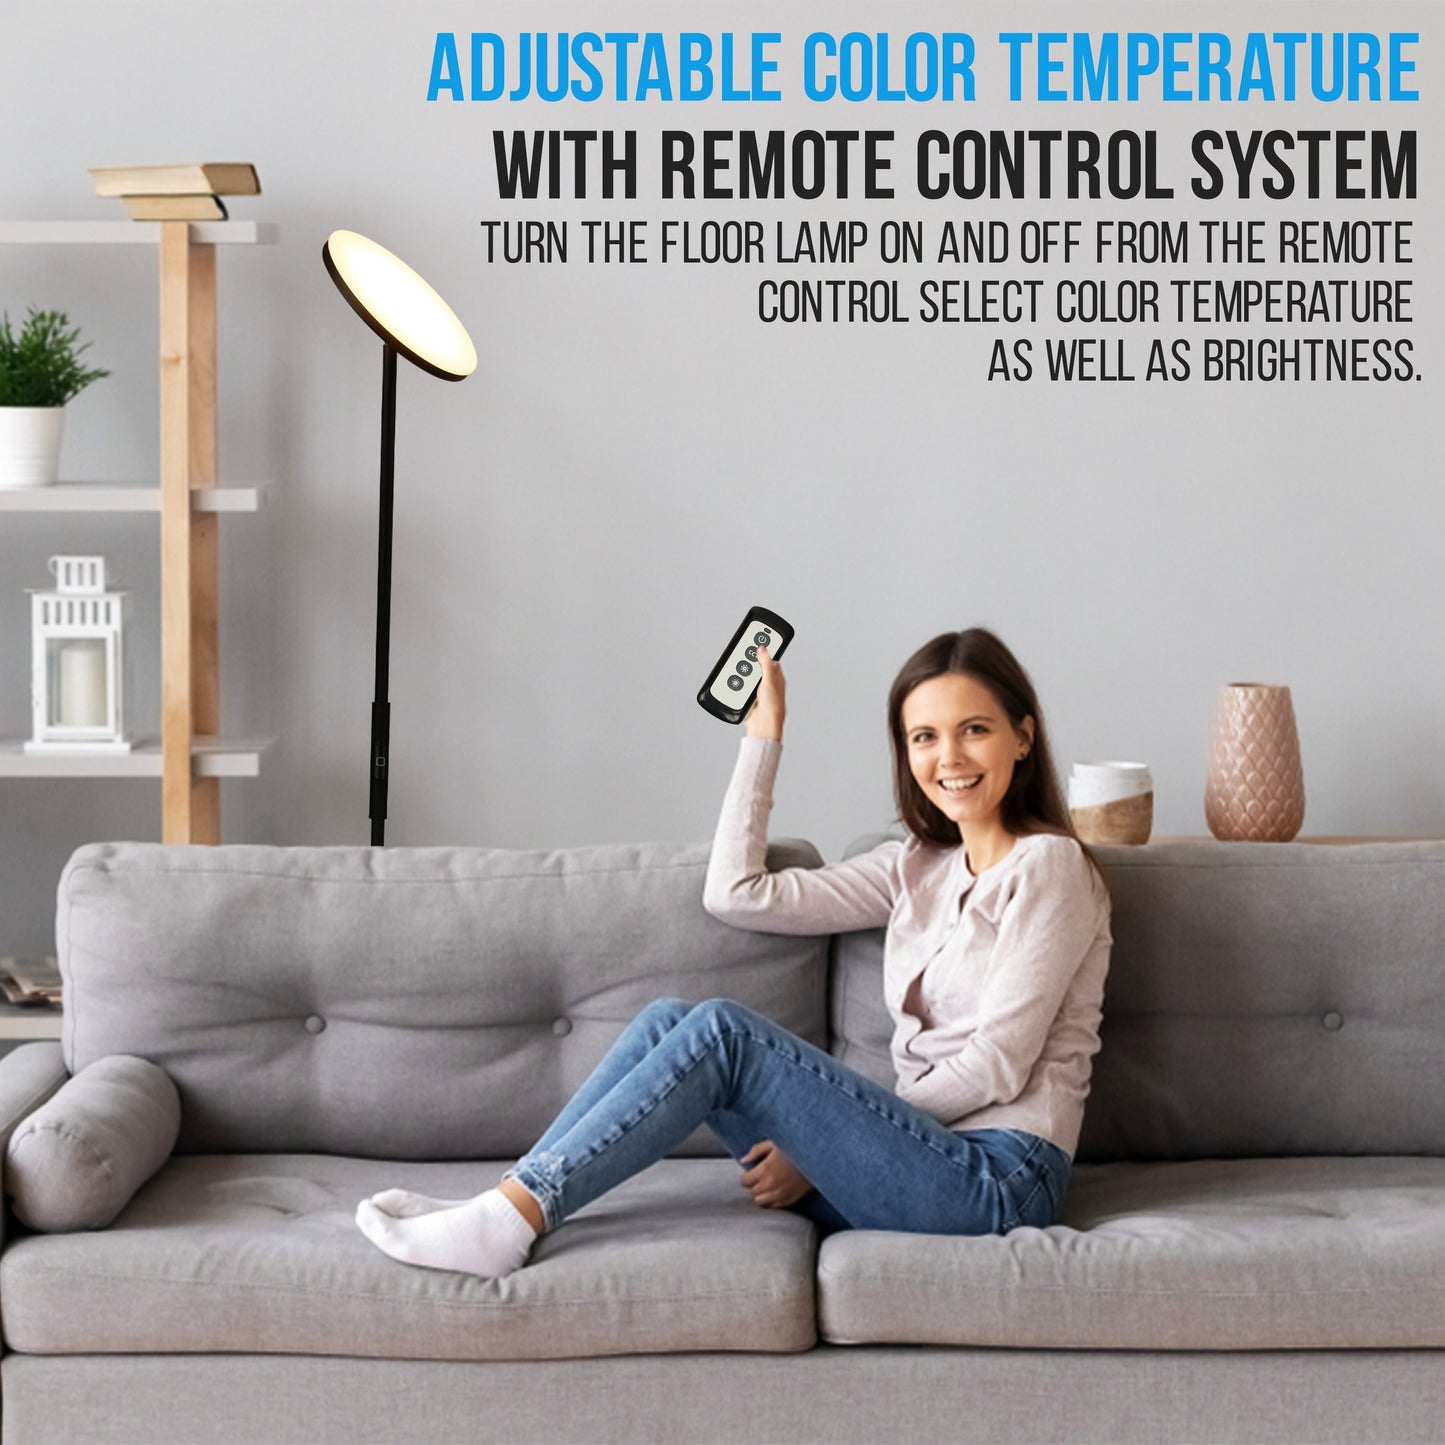 Dimmable LED Floor Lamp with Adjustable Color Temp and Remote Control